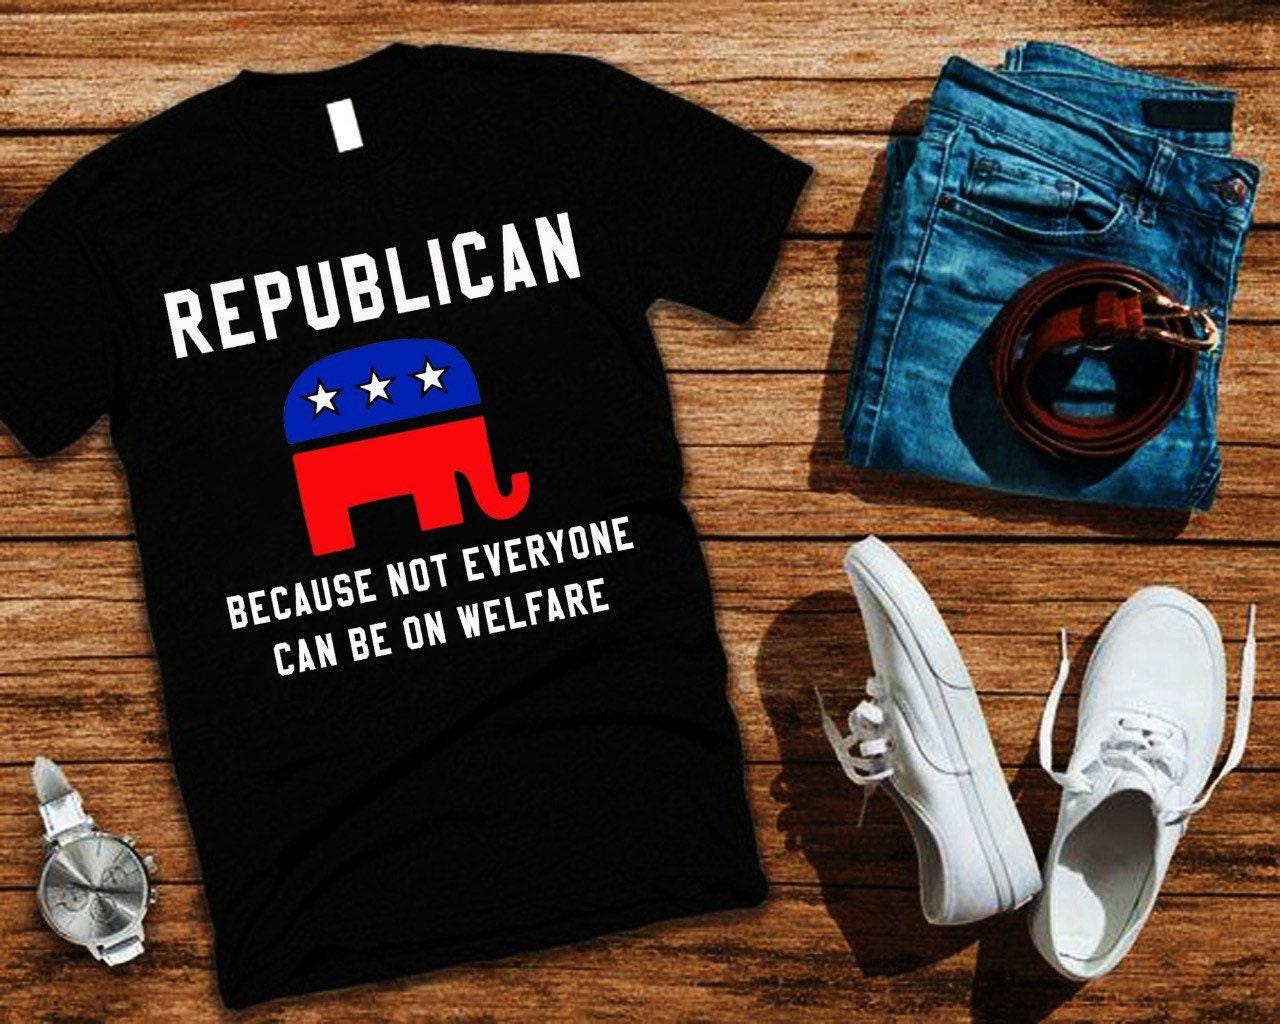 Republican Because Not Everyone Can Be On Welfare T-Shirts,Pro Trump Political Conservative T Shirt, Funny Conservative Unisex MAGA T-Shirt - plusminusco.com